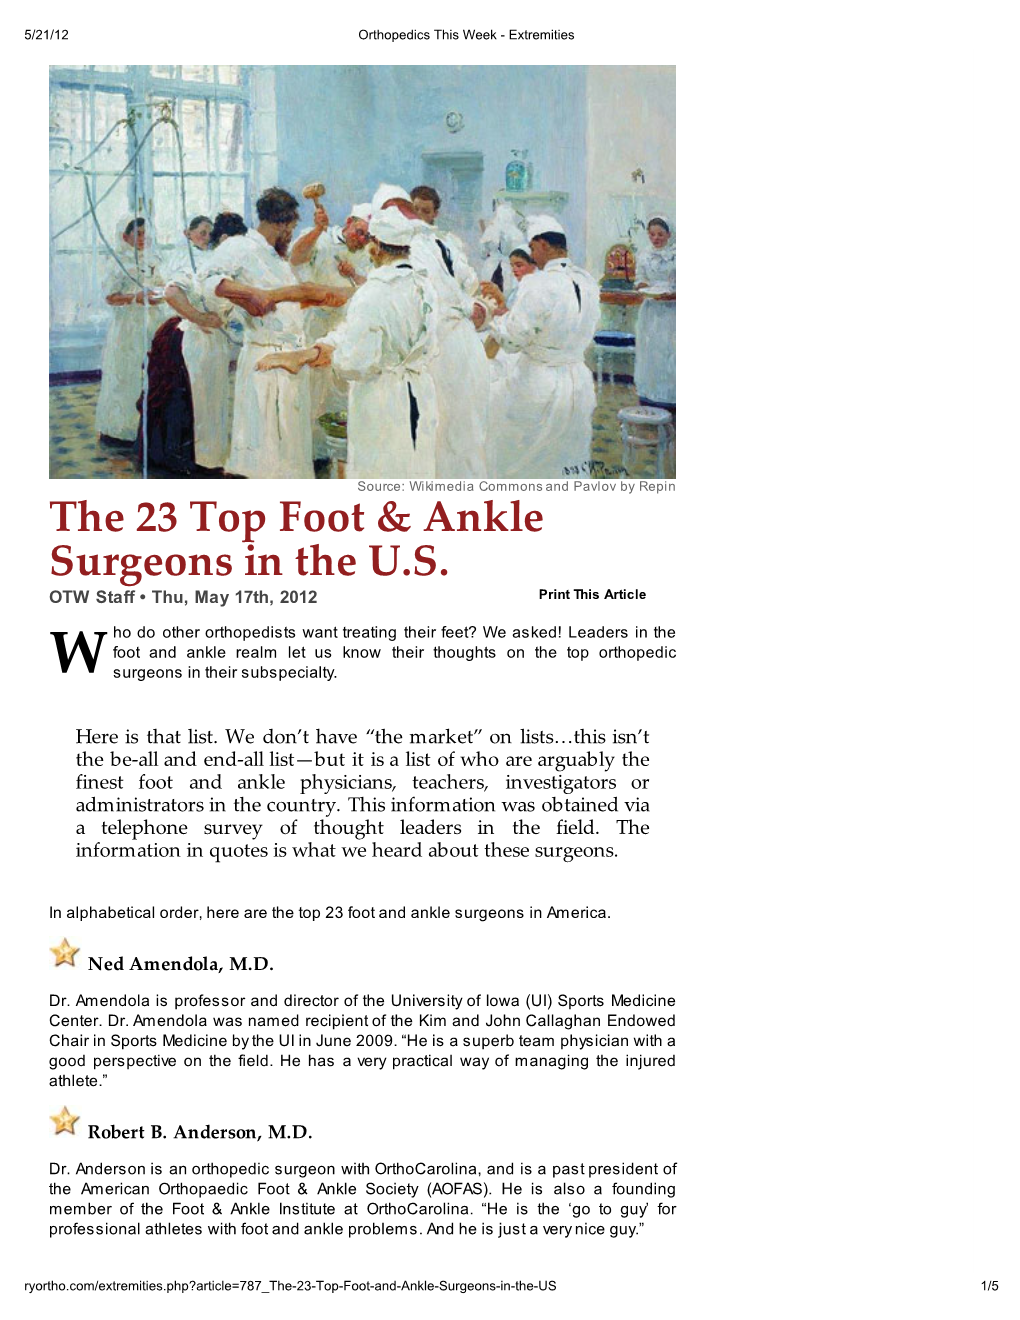 The 23 Top Foot & Ankle Surgeons in the U.S